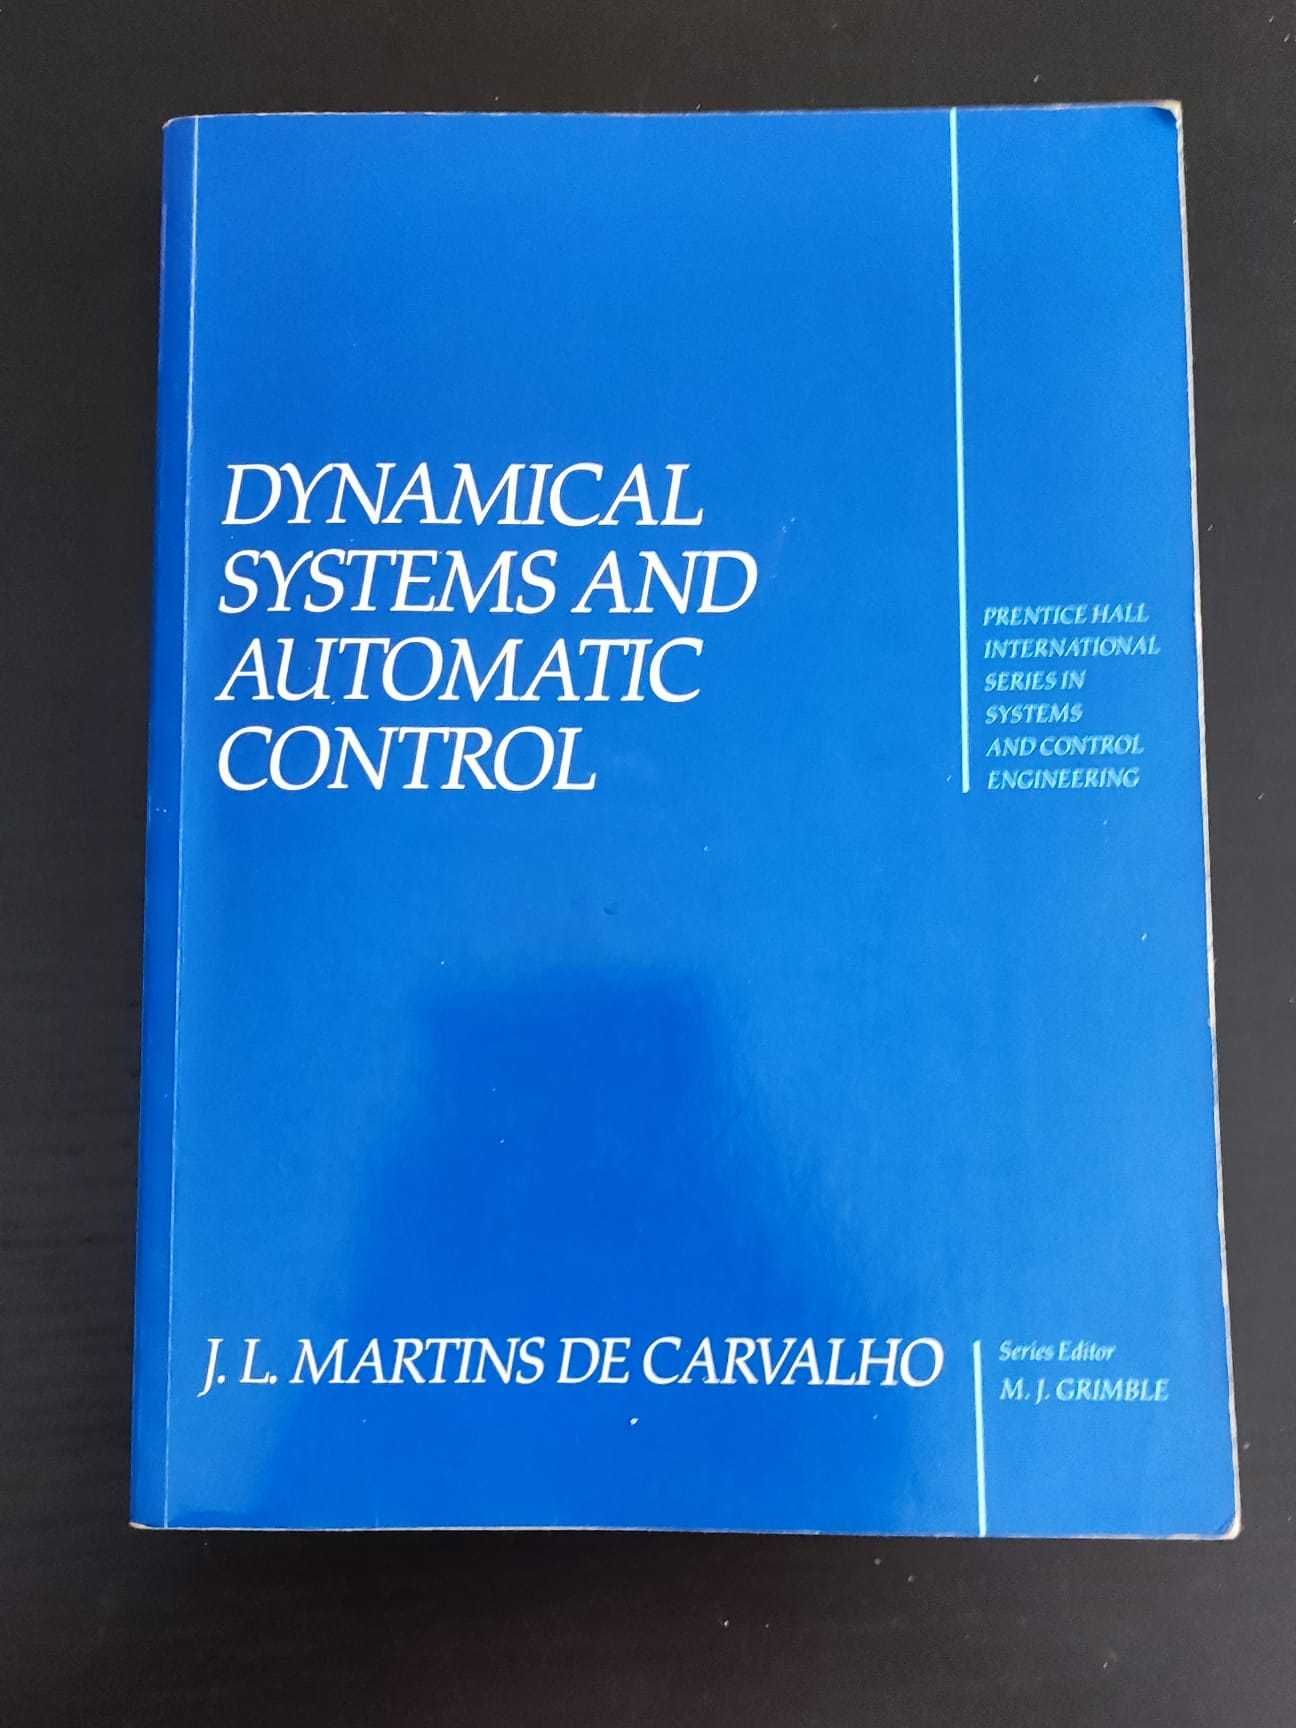 Livro 'Dynamical Systems and Automatic Control'.